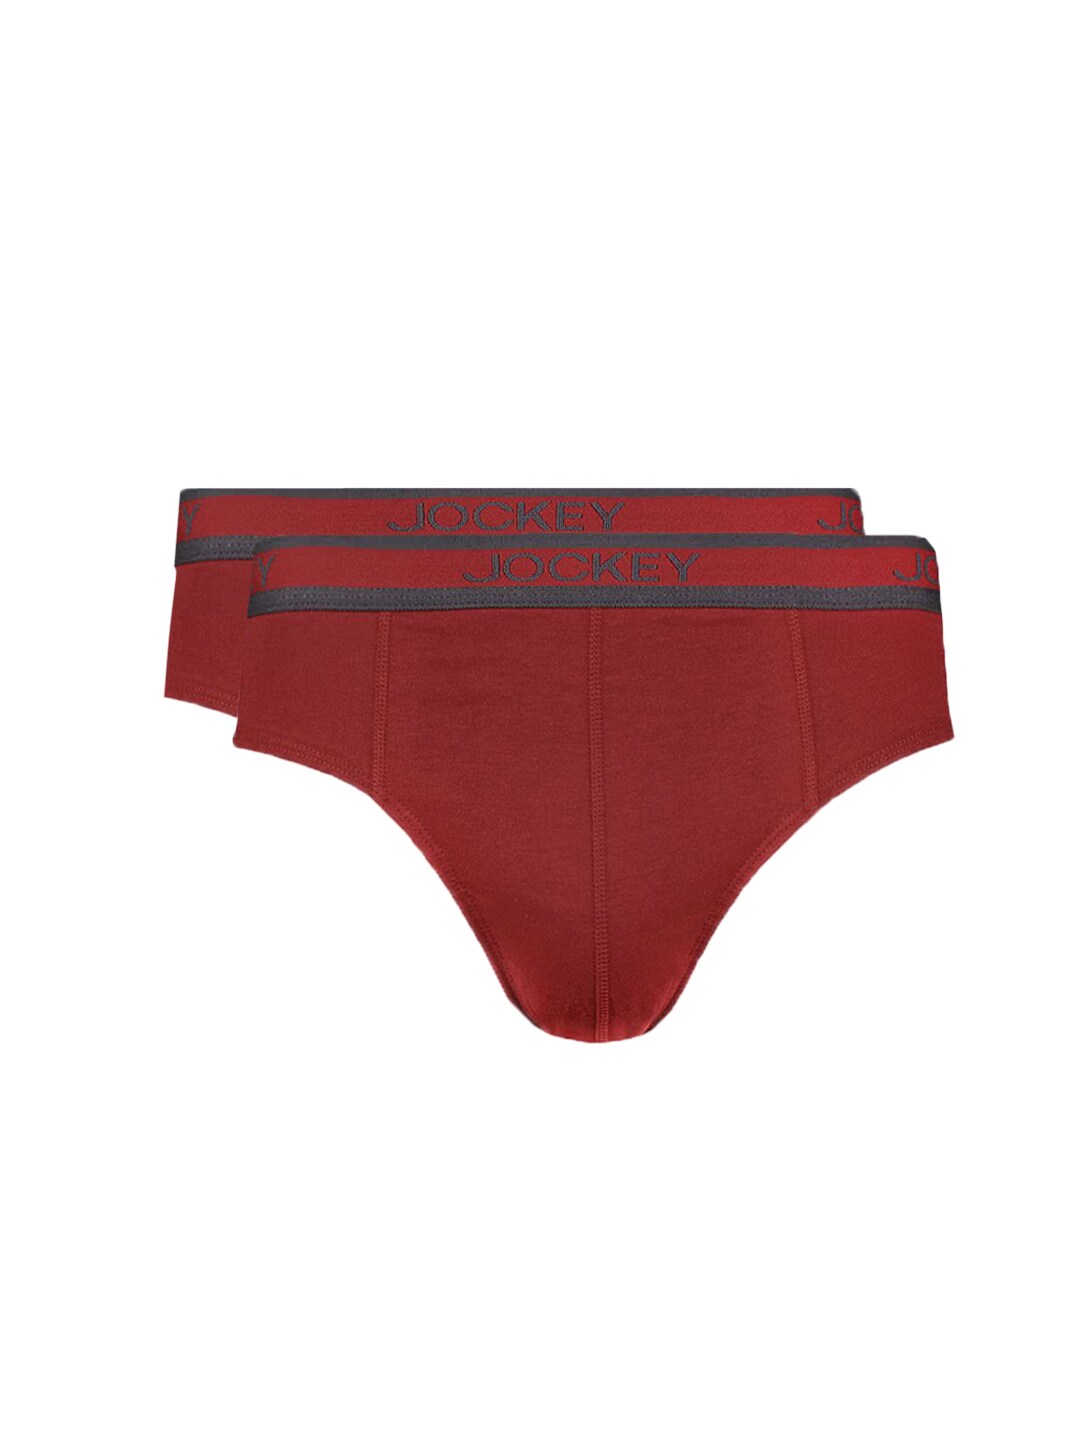 Jockey ELANCE Mens Red Pack of two Briefs 1010